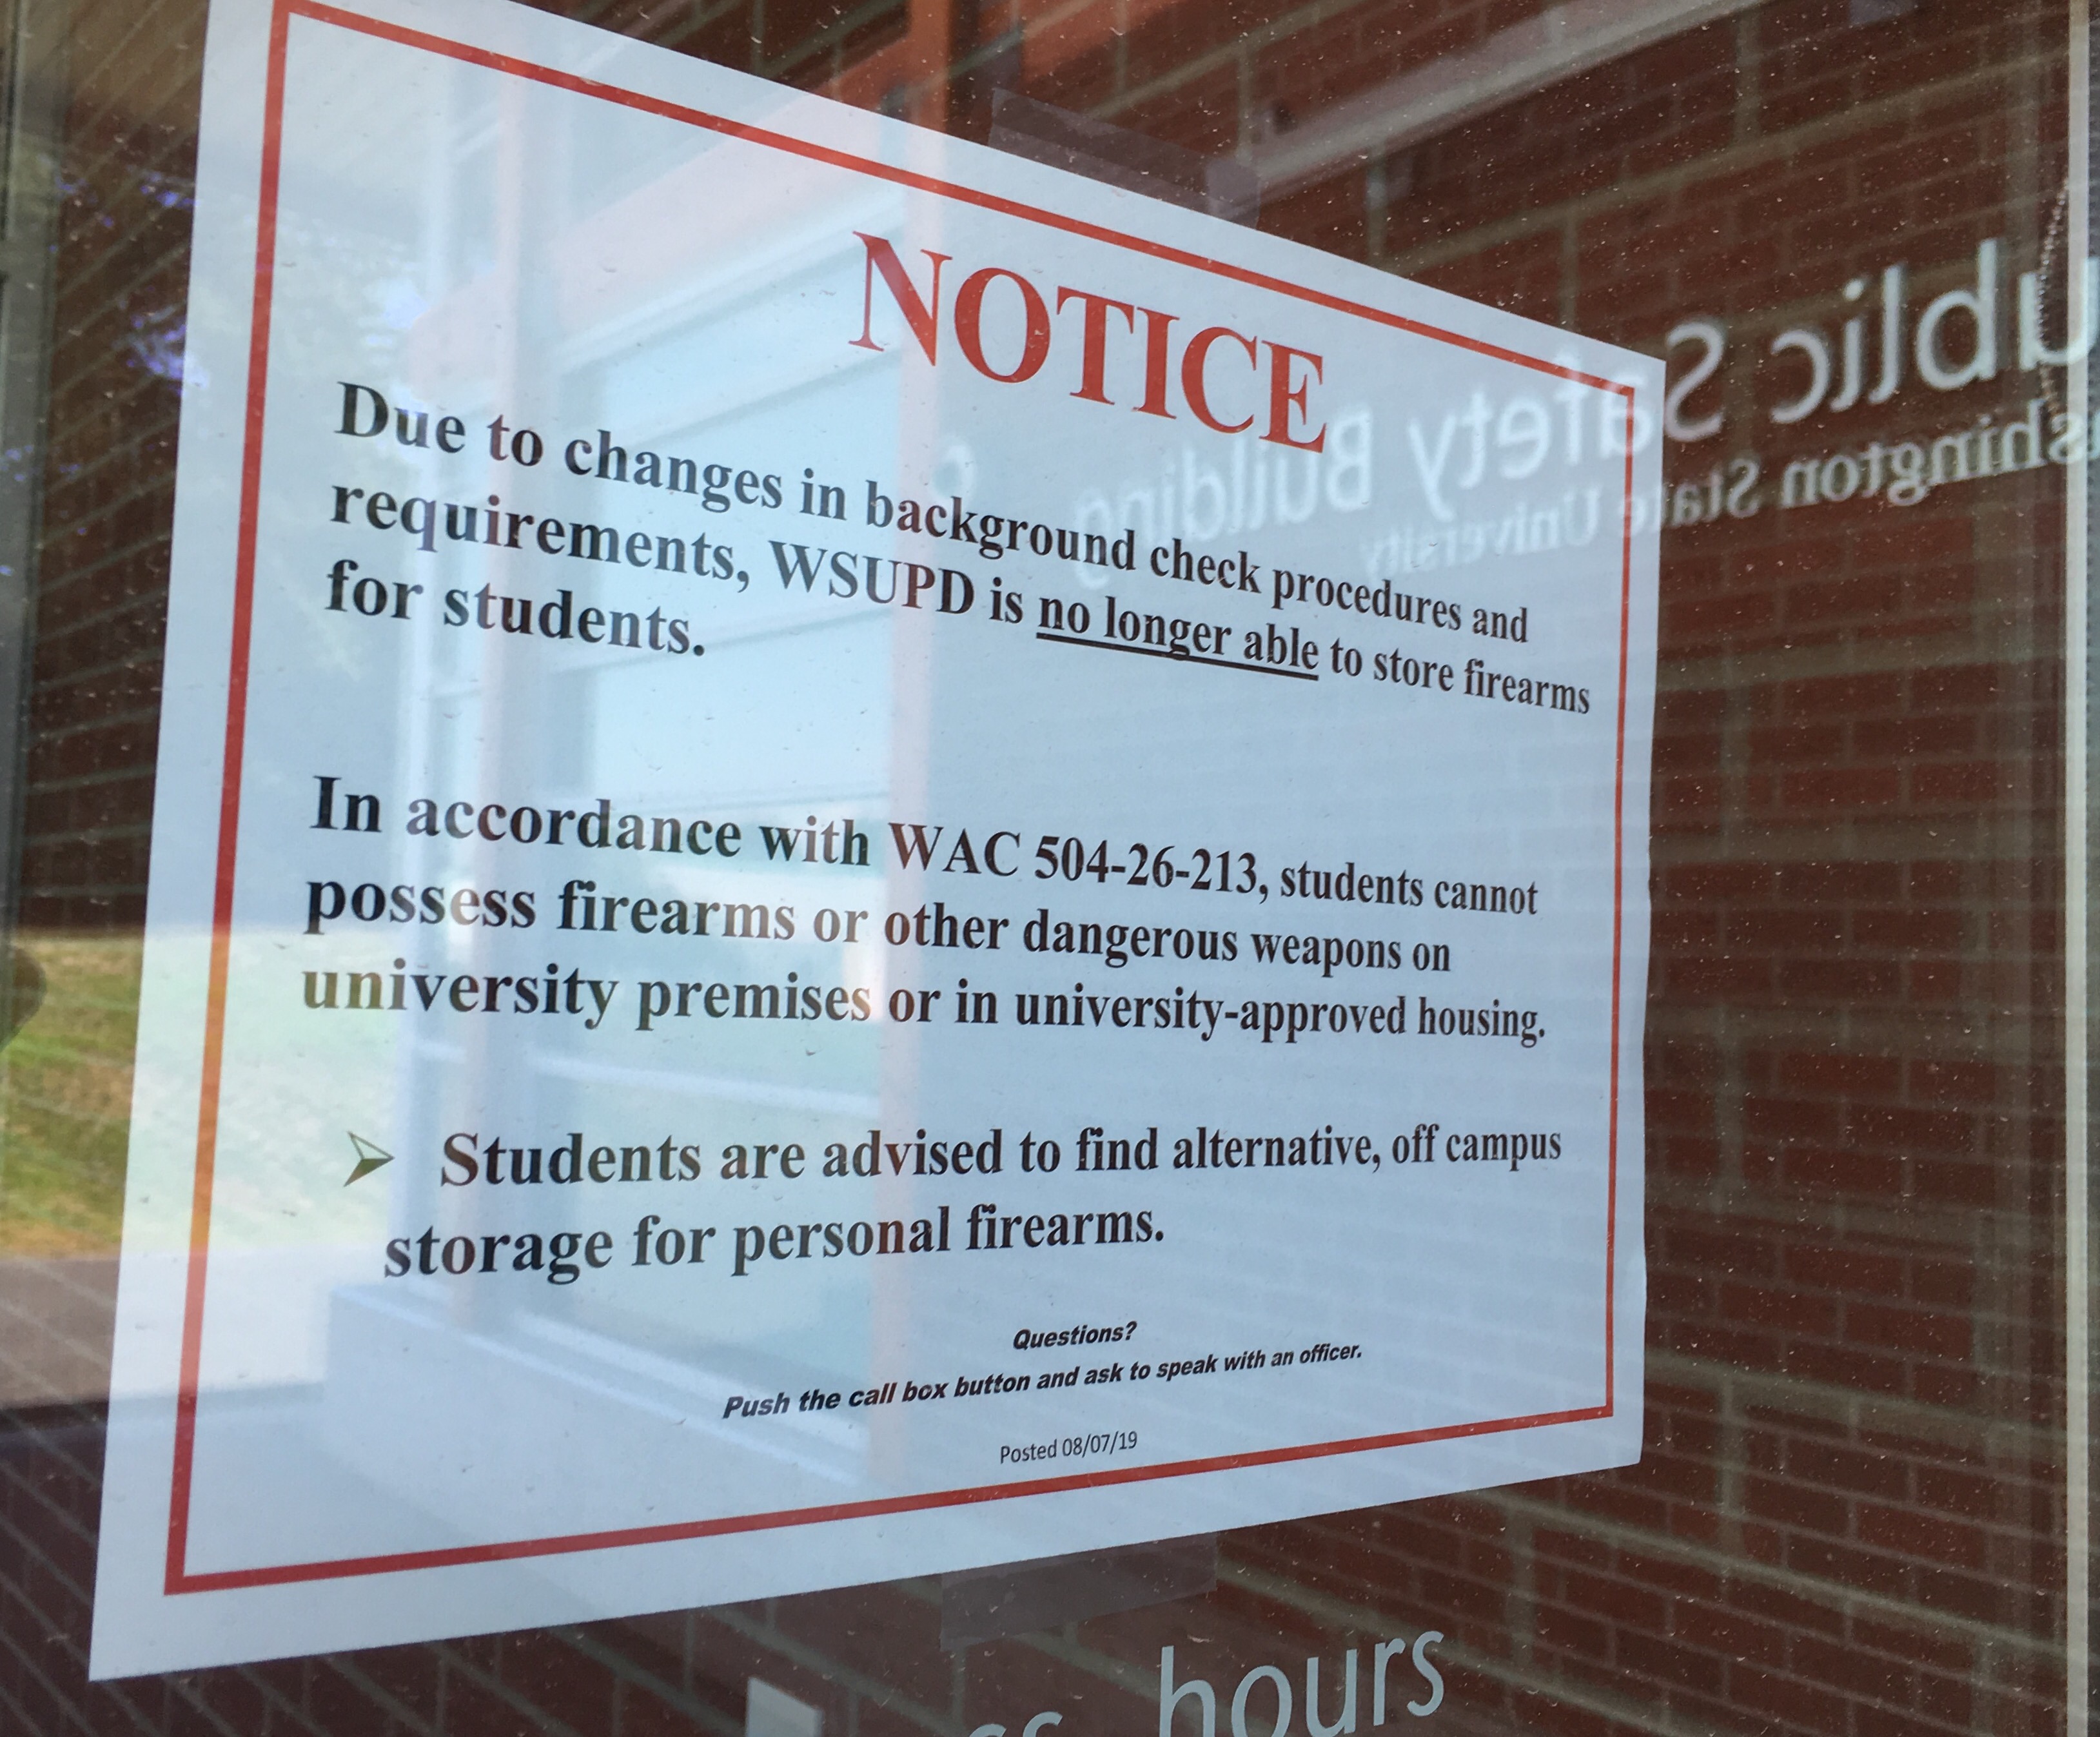 Reflecting on the glass door of the WSU Public Safety Building, a sign on the door announces the gun storage policy change Aug. 14, 2019. CREDIT: SCOTT LEADINGHAM/NWPB